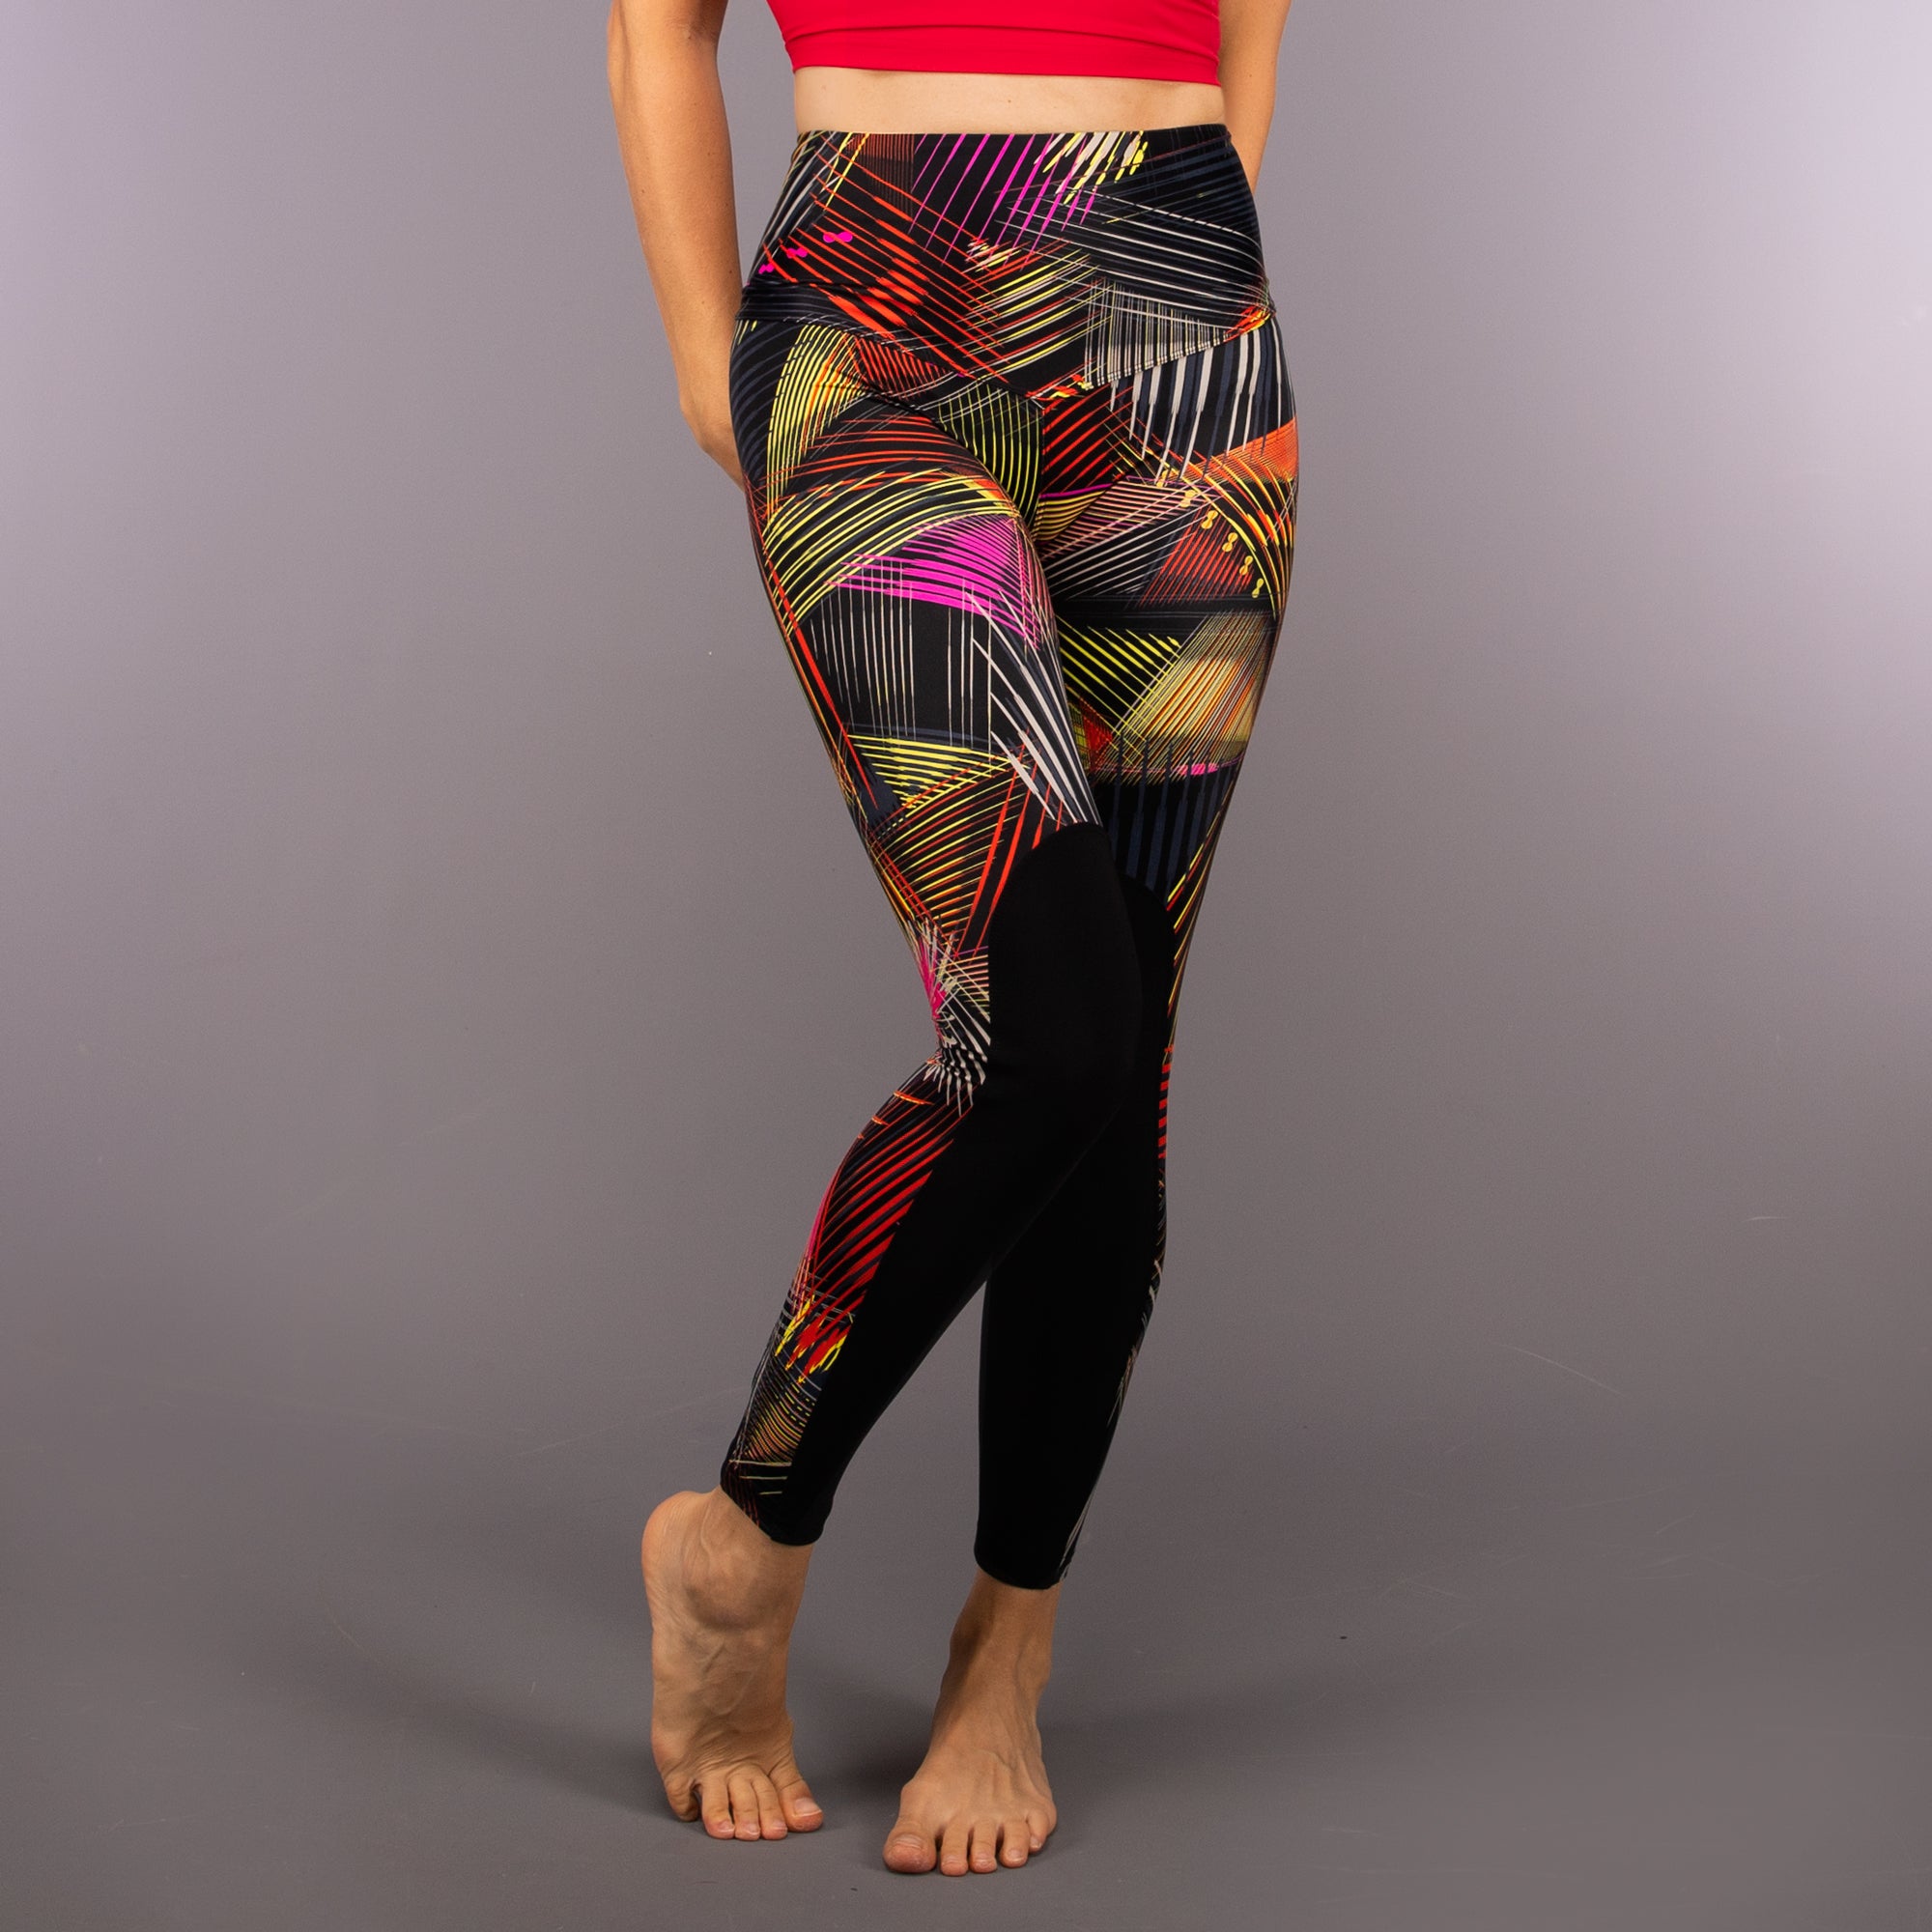 MATILDA Leggings | Abrasion Resistant & Hard Wearing | 3RD ROCK Clothing -  Jessica is 5ft 7" with a 32" inseam, 30" waist and 39" hip and wears a 10. F